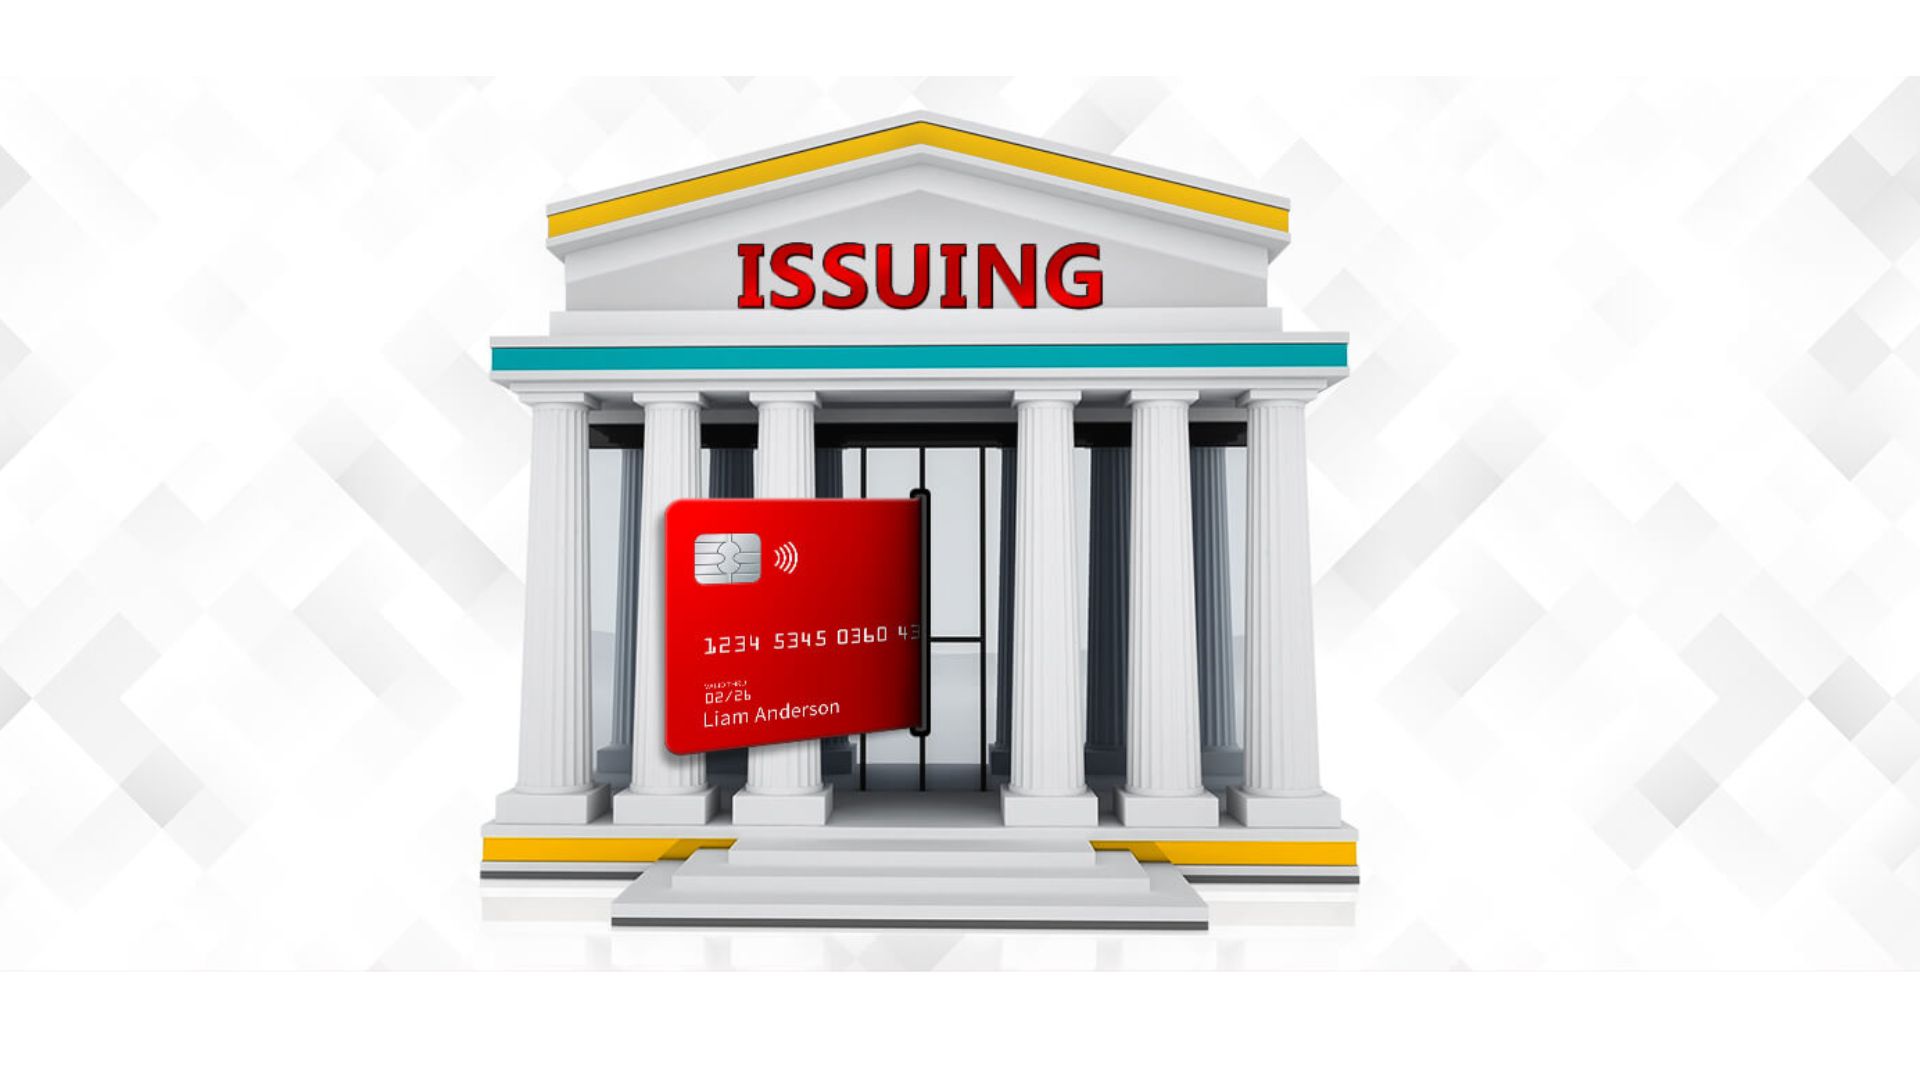 Issuer and Backing Bank